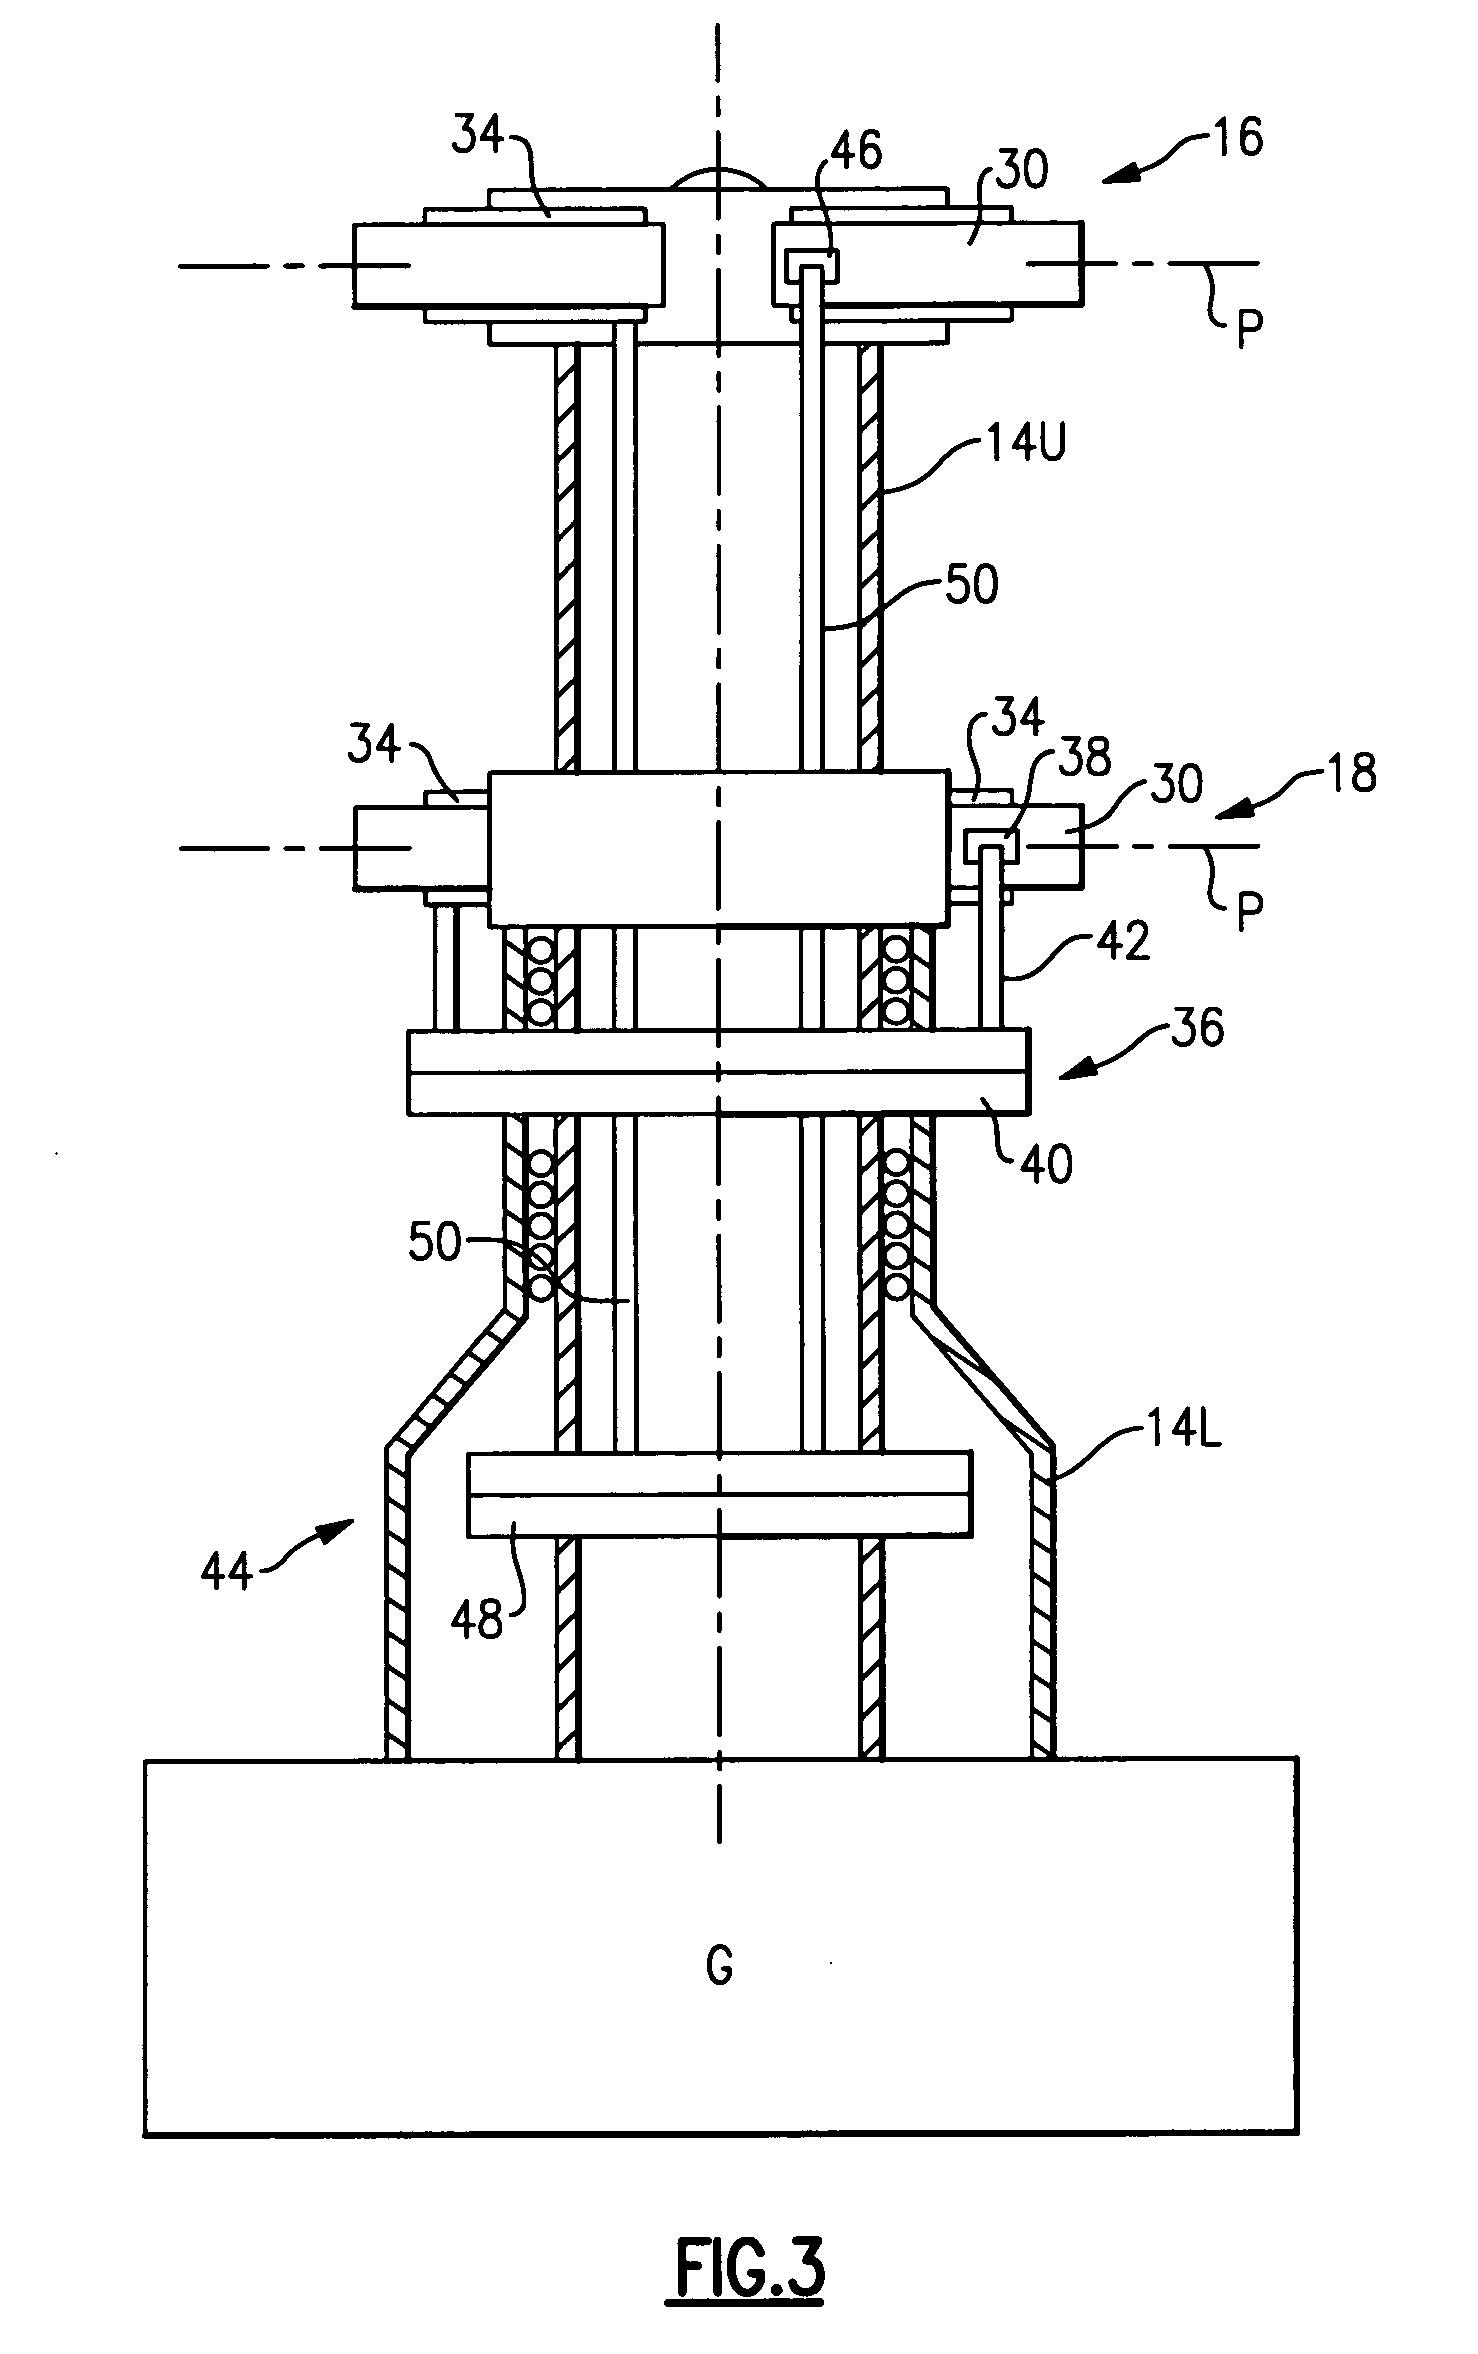 Dual higher harmonic control (HHC) for a counter-rotating, coaxial rotor system